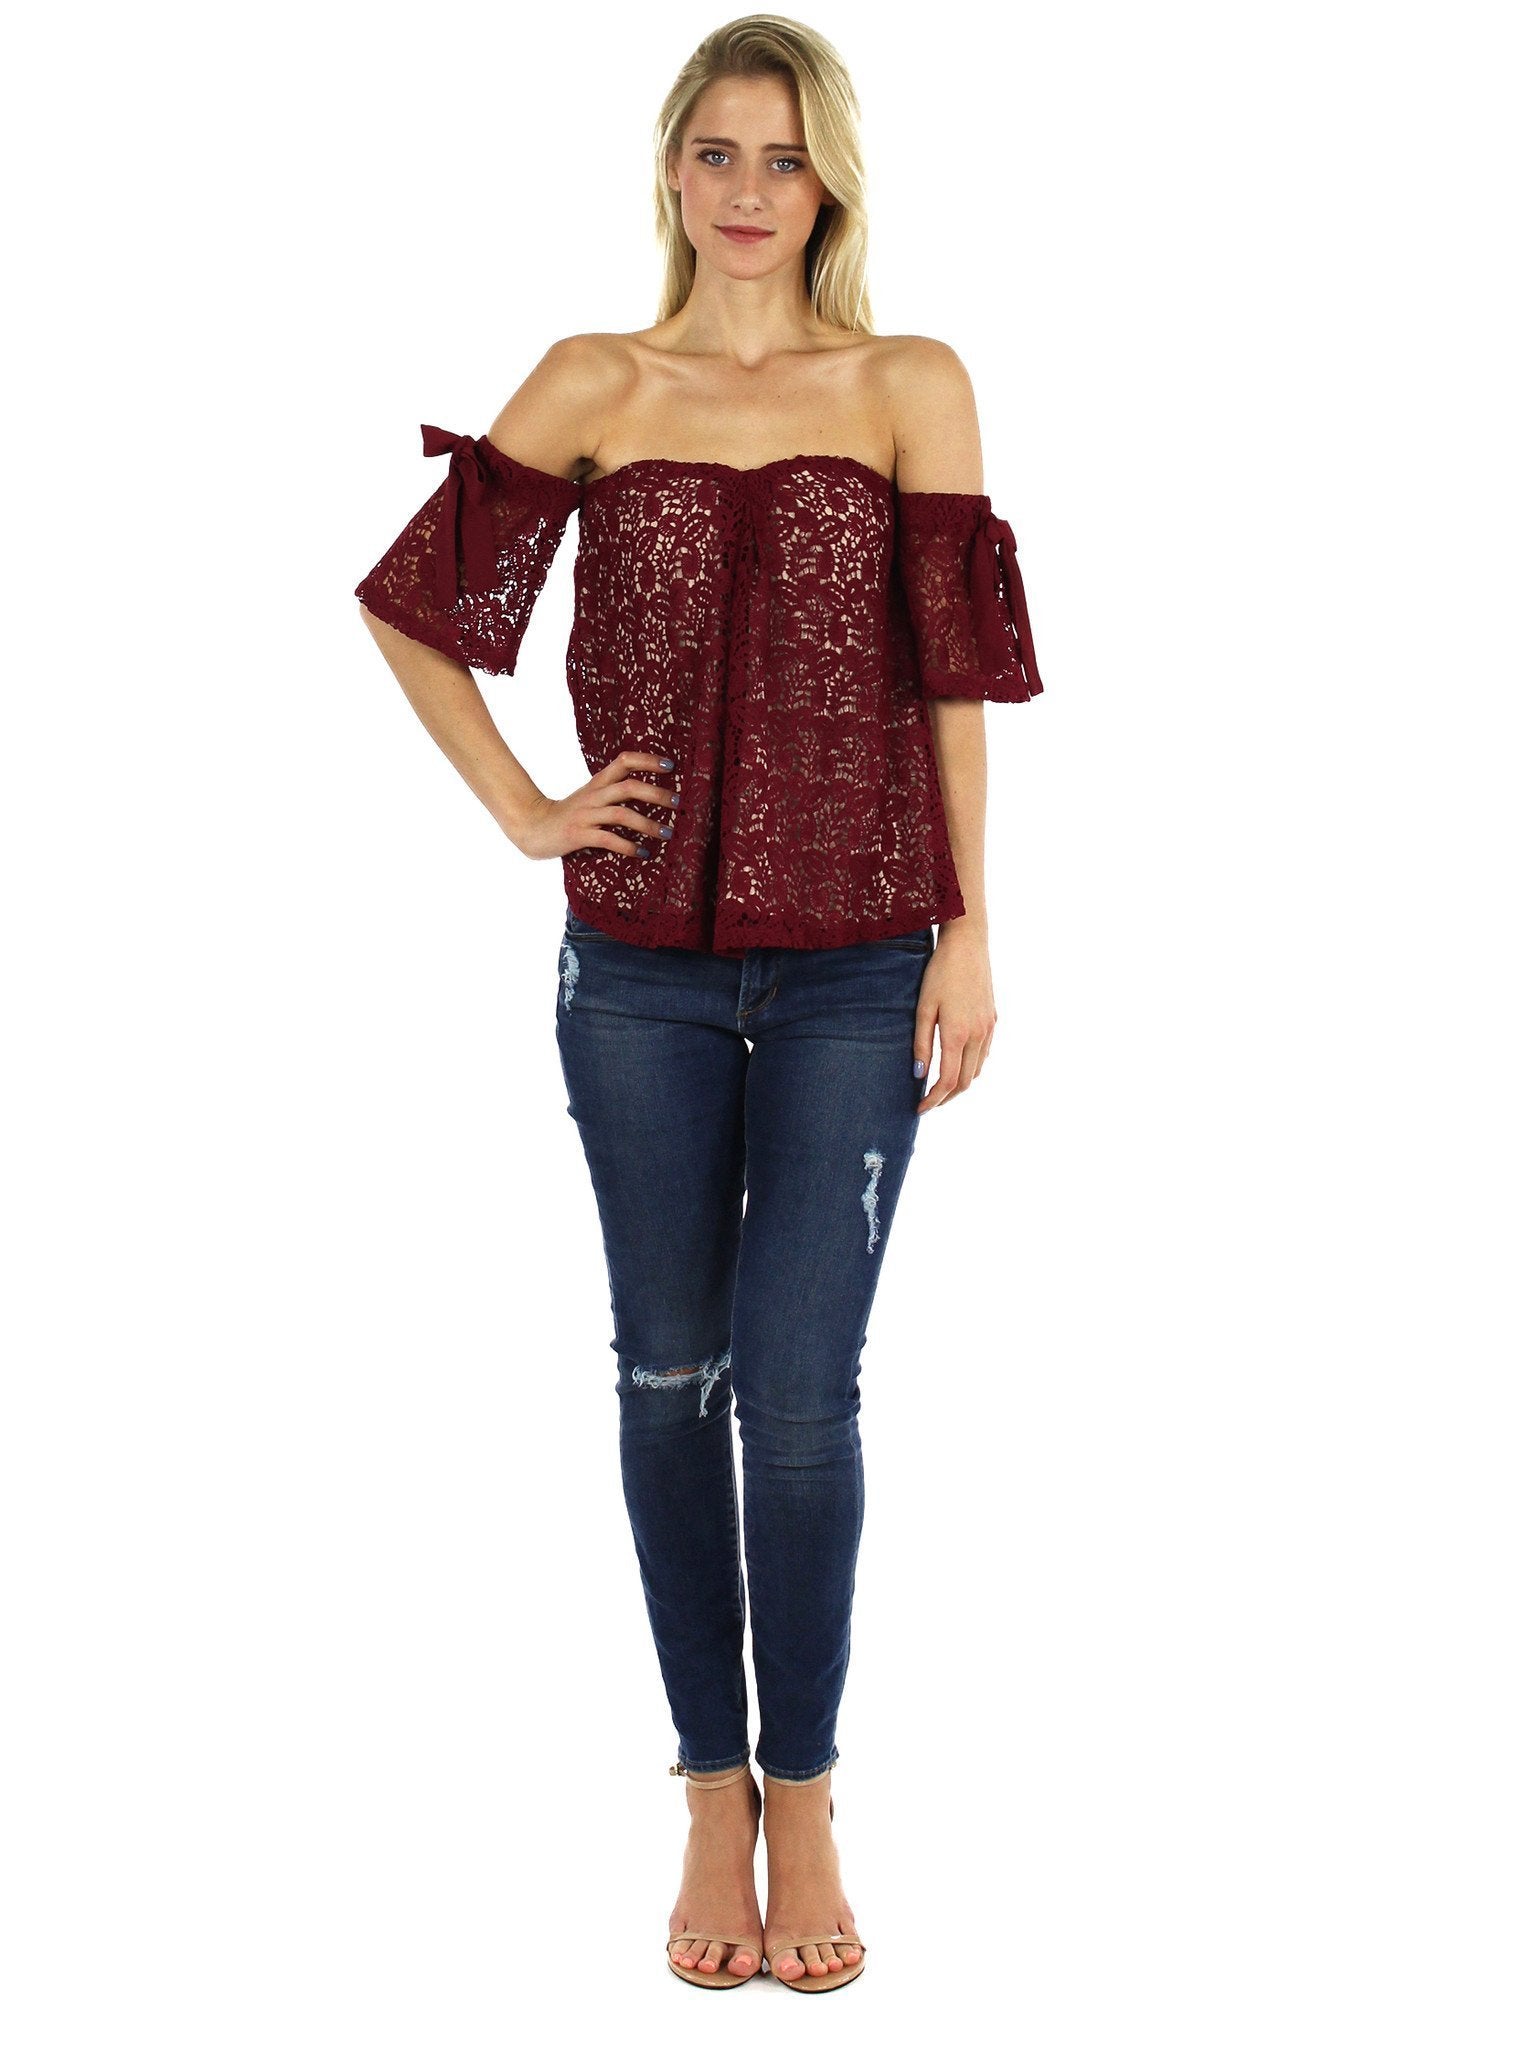 Women wearing a top rental from Moon River called Off Shoulder Lace Top